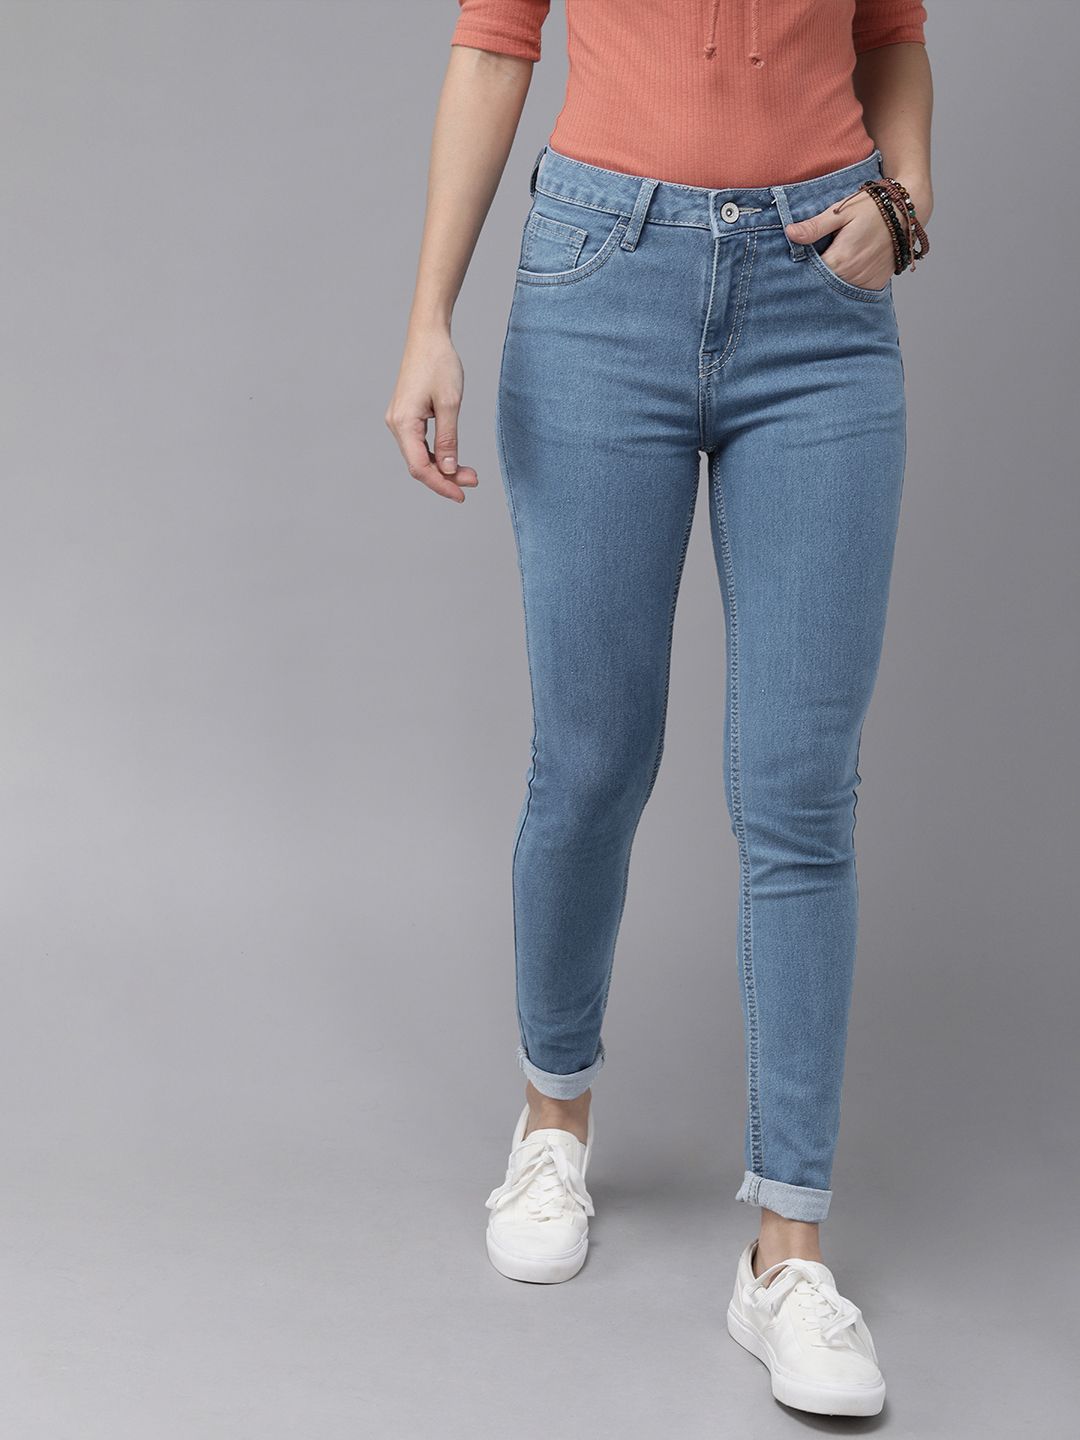 Roadster Women Blue Skinny Fit Mid-Rise Clean Look Stretchable Jeans Price in India